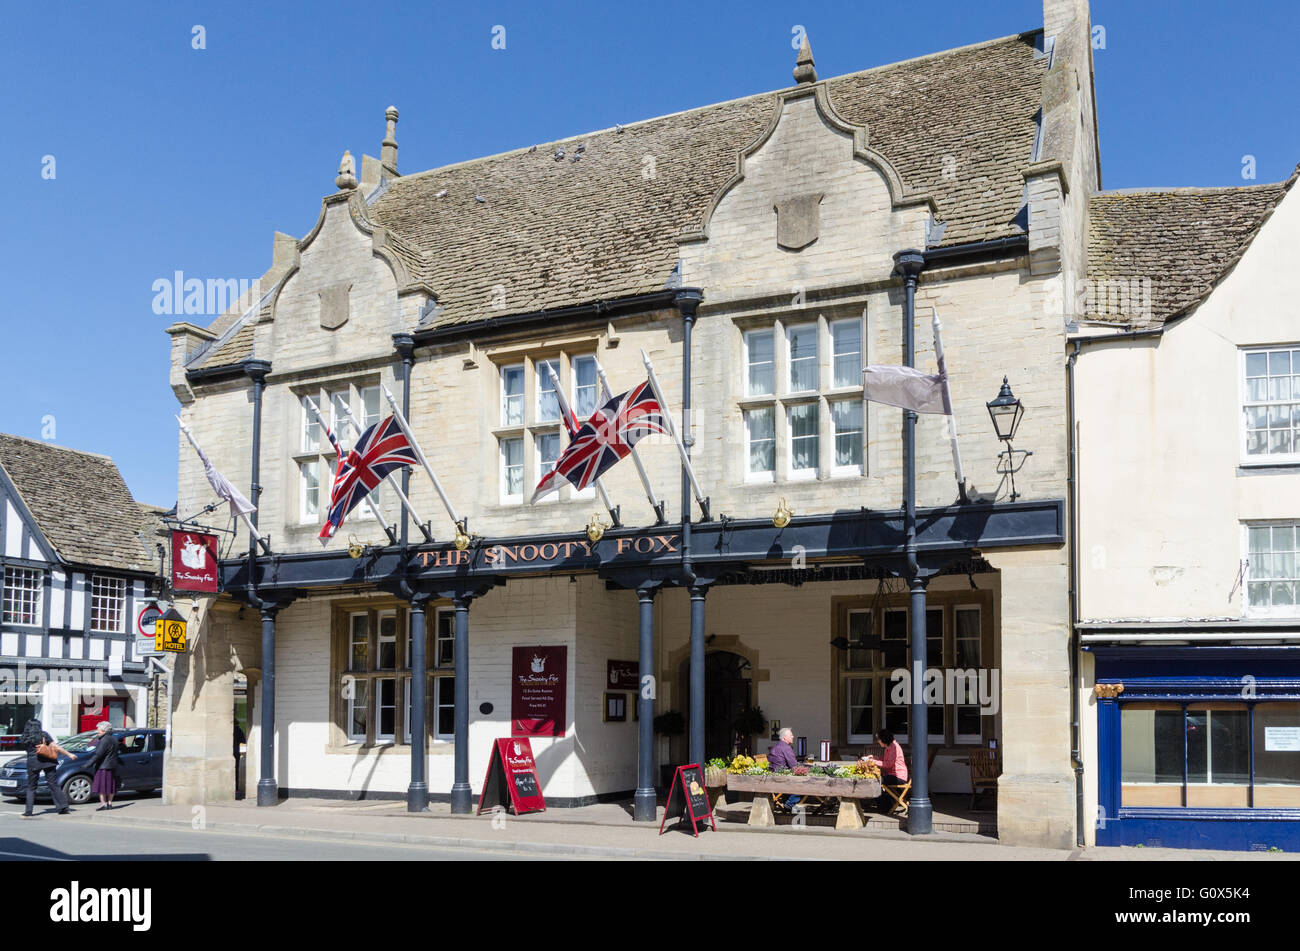 The Snooty Fox Hotel and pub in the centre of the Cotswold town of Tetbury Stock Photo